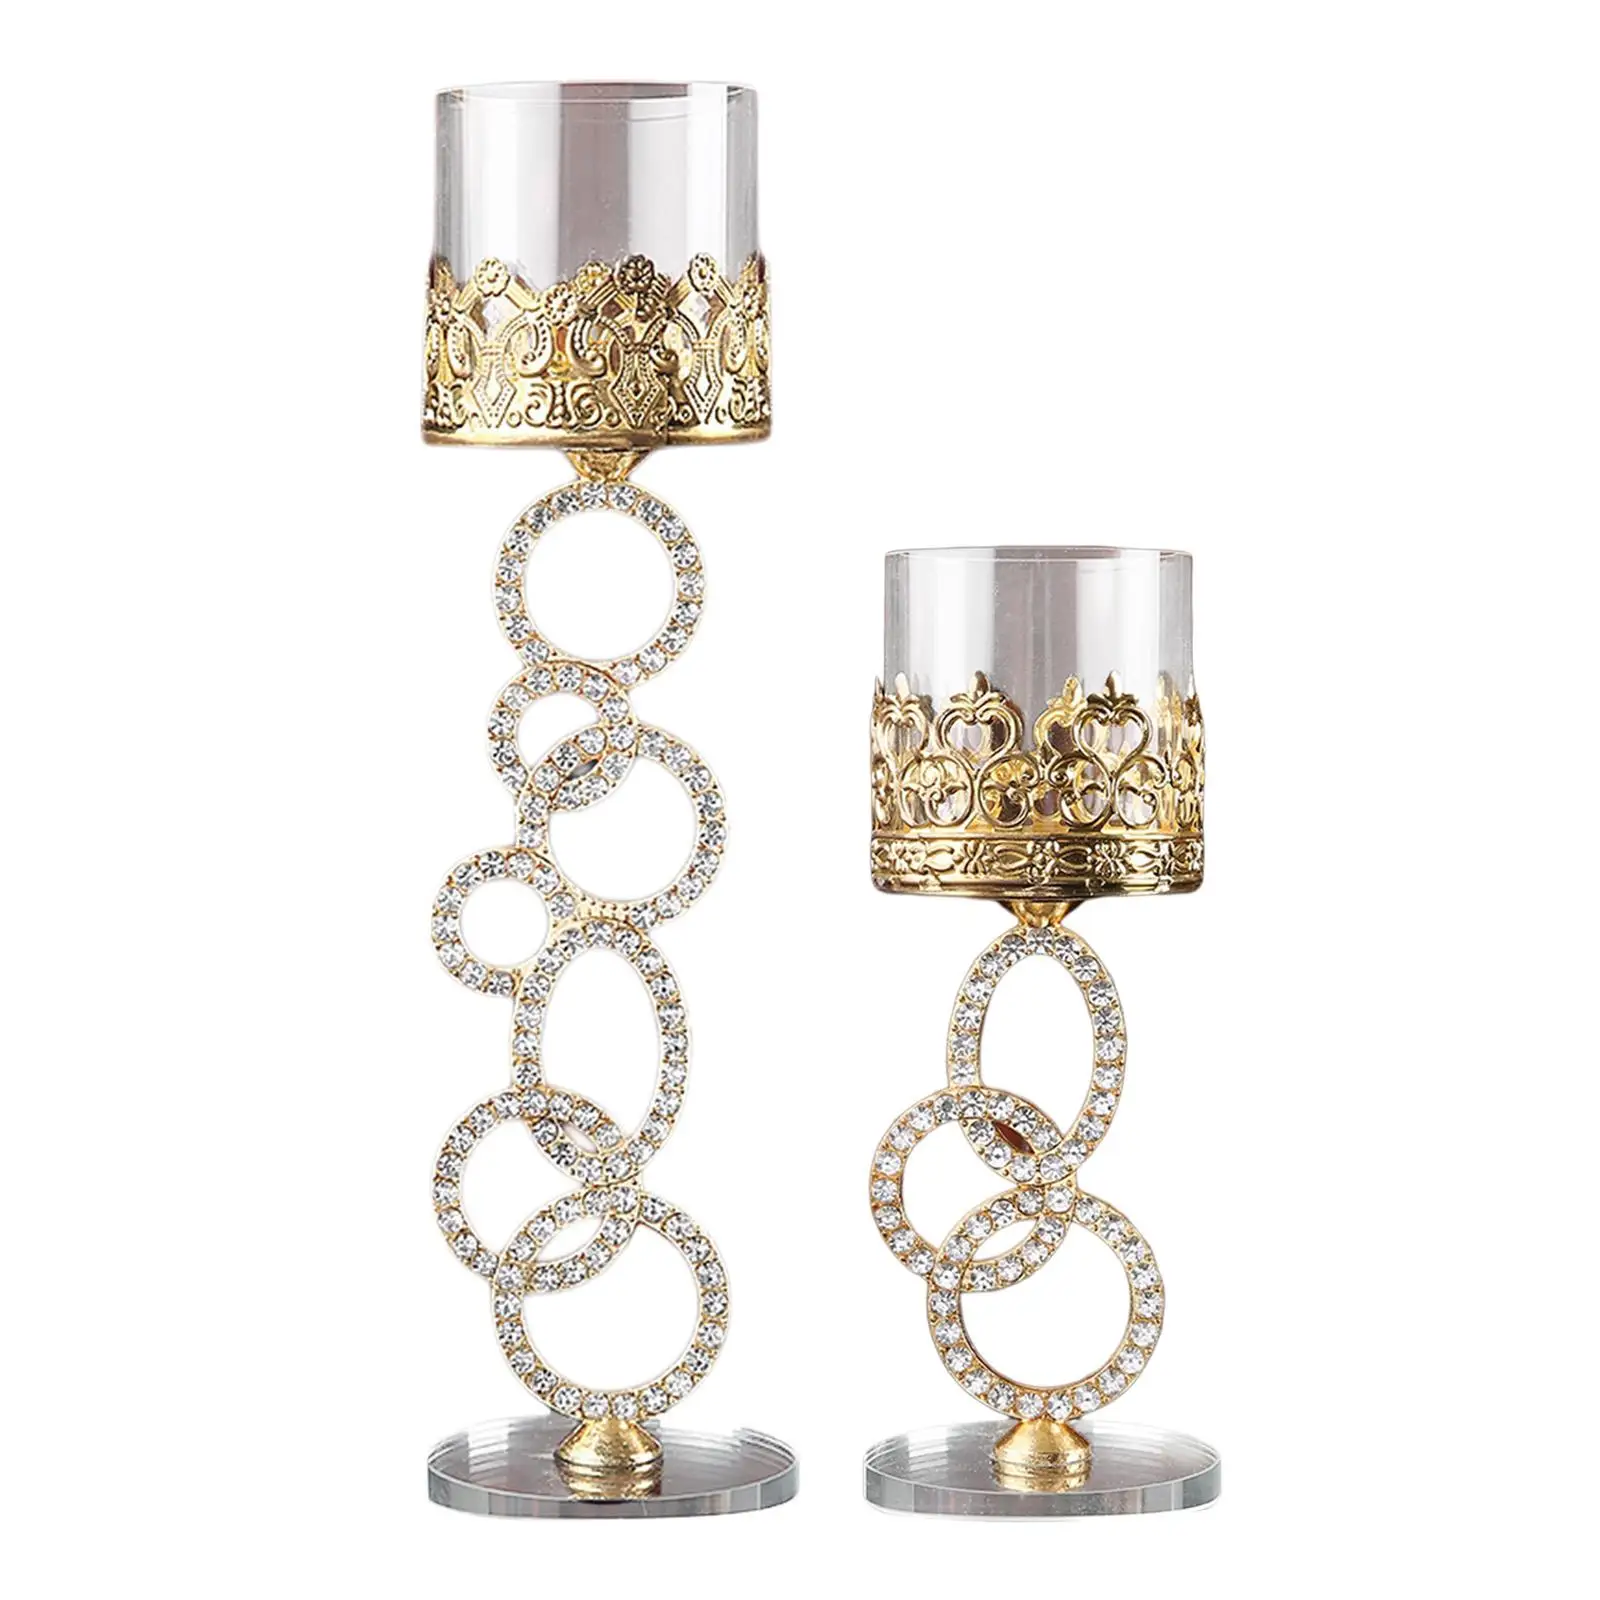 Glass Crystal Candlestick Light Luxury Event Party Decorative Candle Holders